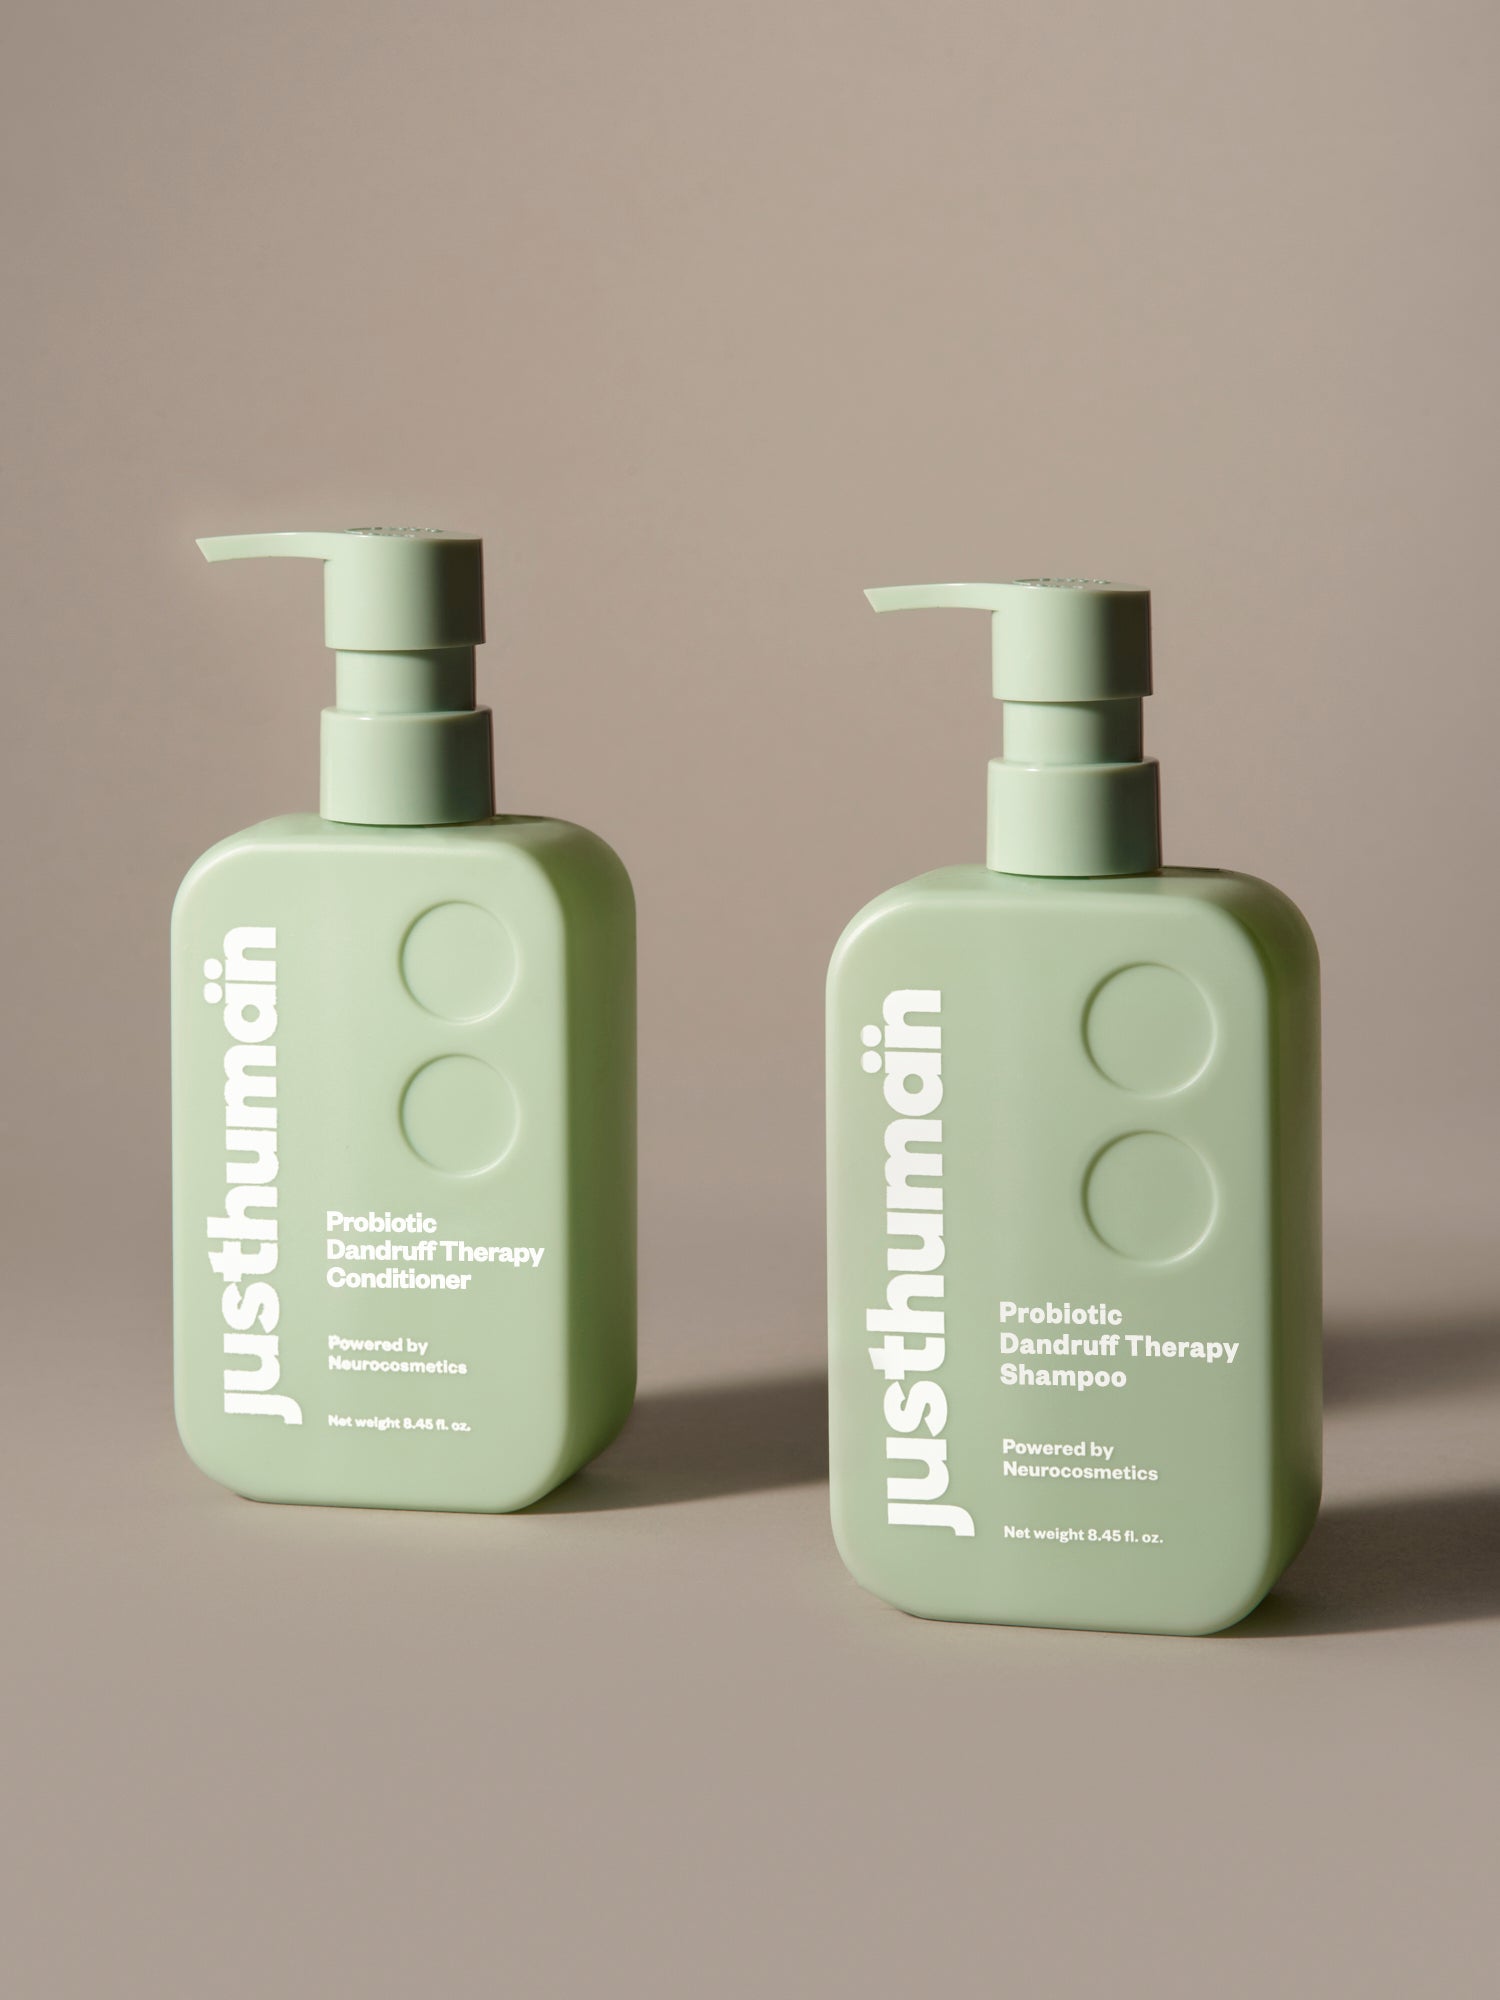 Probiotic Dandruff Therapy Duo JustHuman